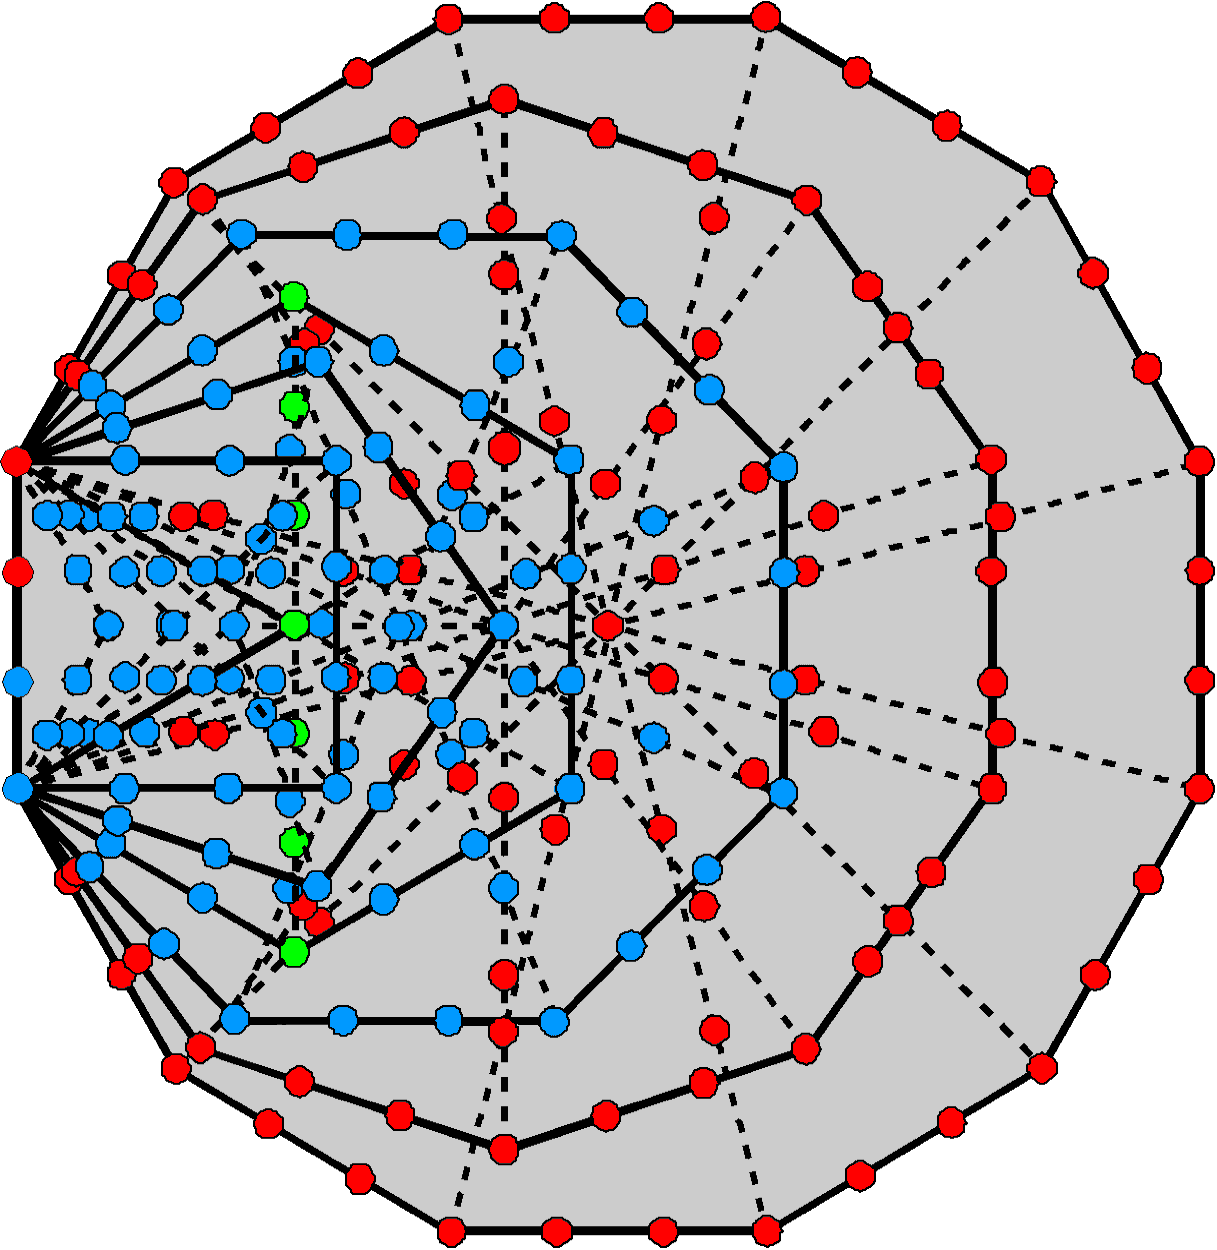 (105+105) intrinsic boundary yods in 7 enfolded polygons